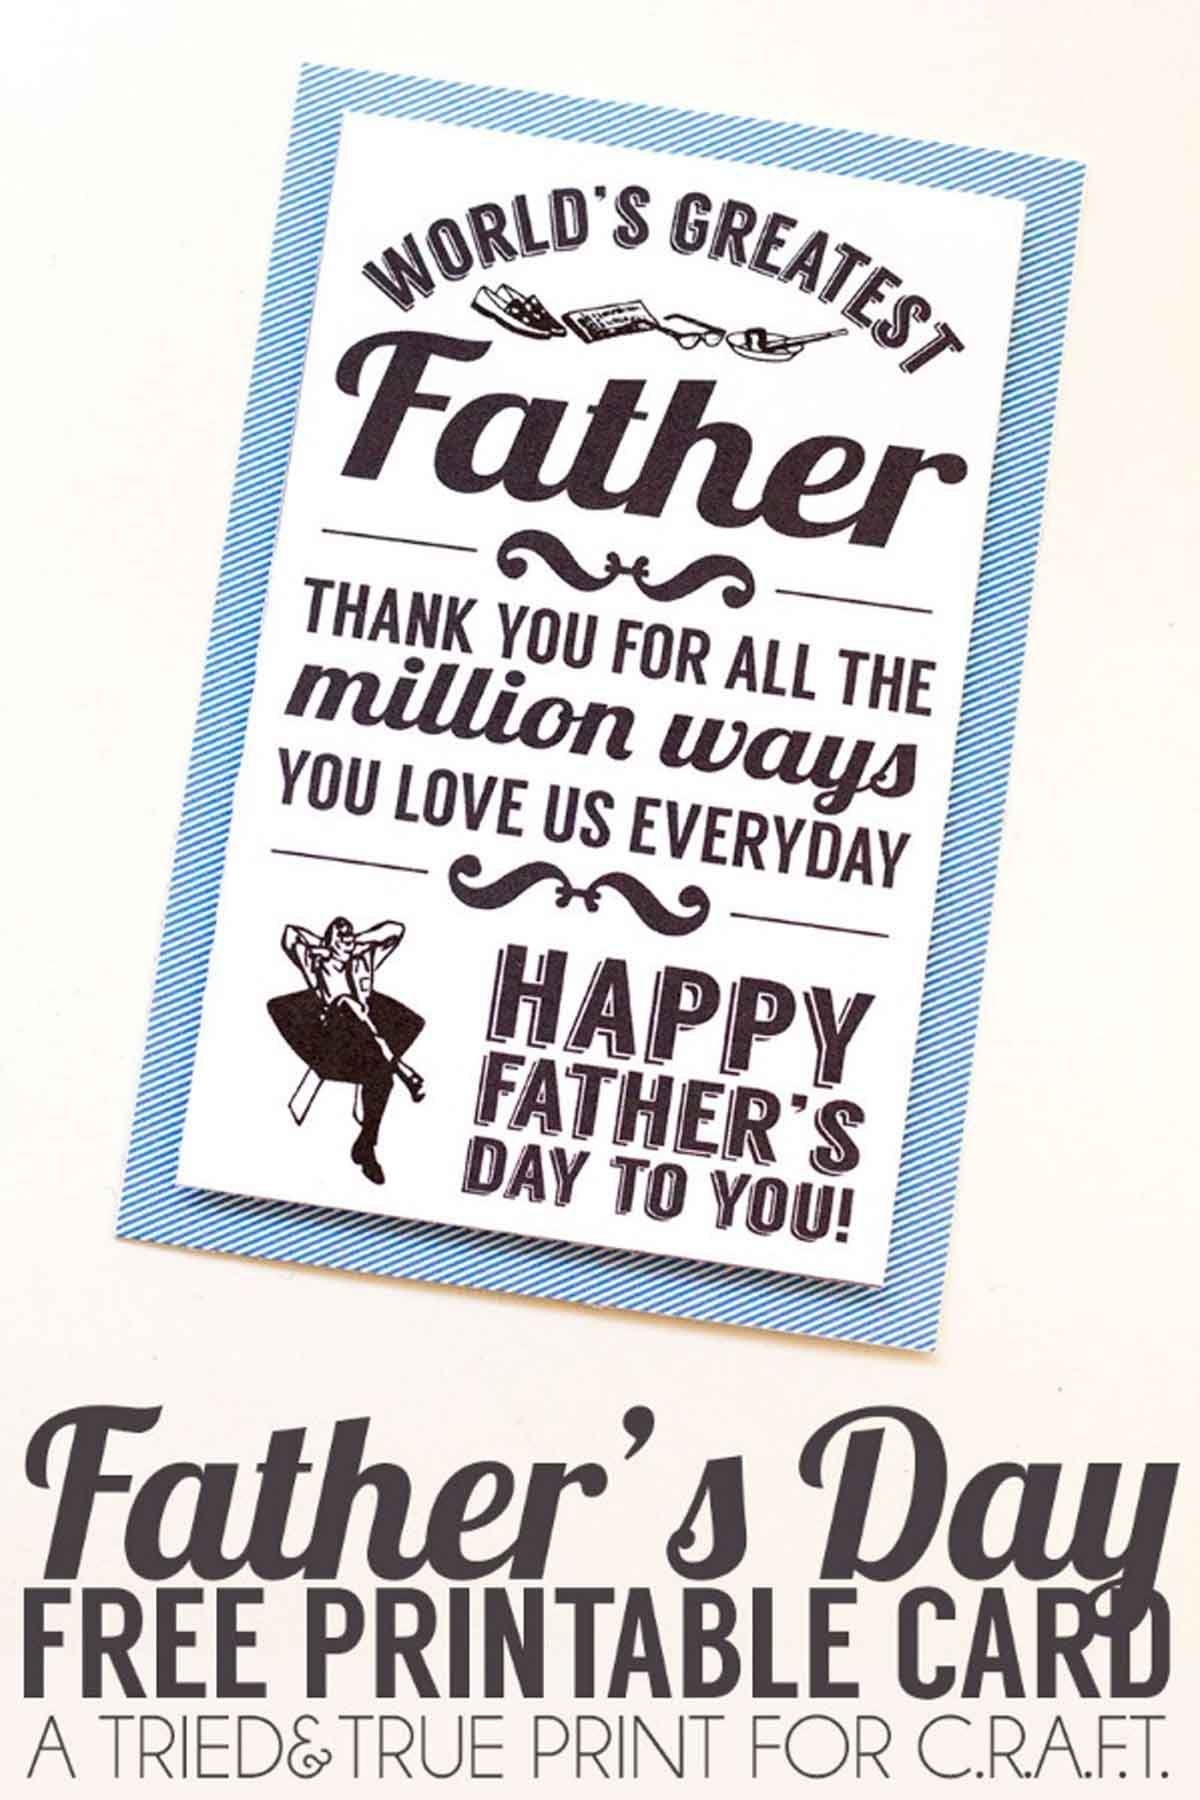 Print One Of These Free Father&amp;#039;s Day Cards If You Forgot To Buy One - Free Printable Father&amp;#039;s Day Card From Wife To Husband